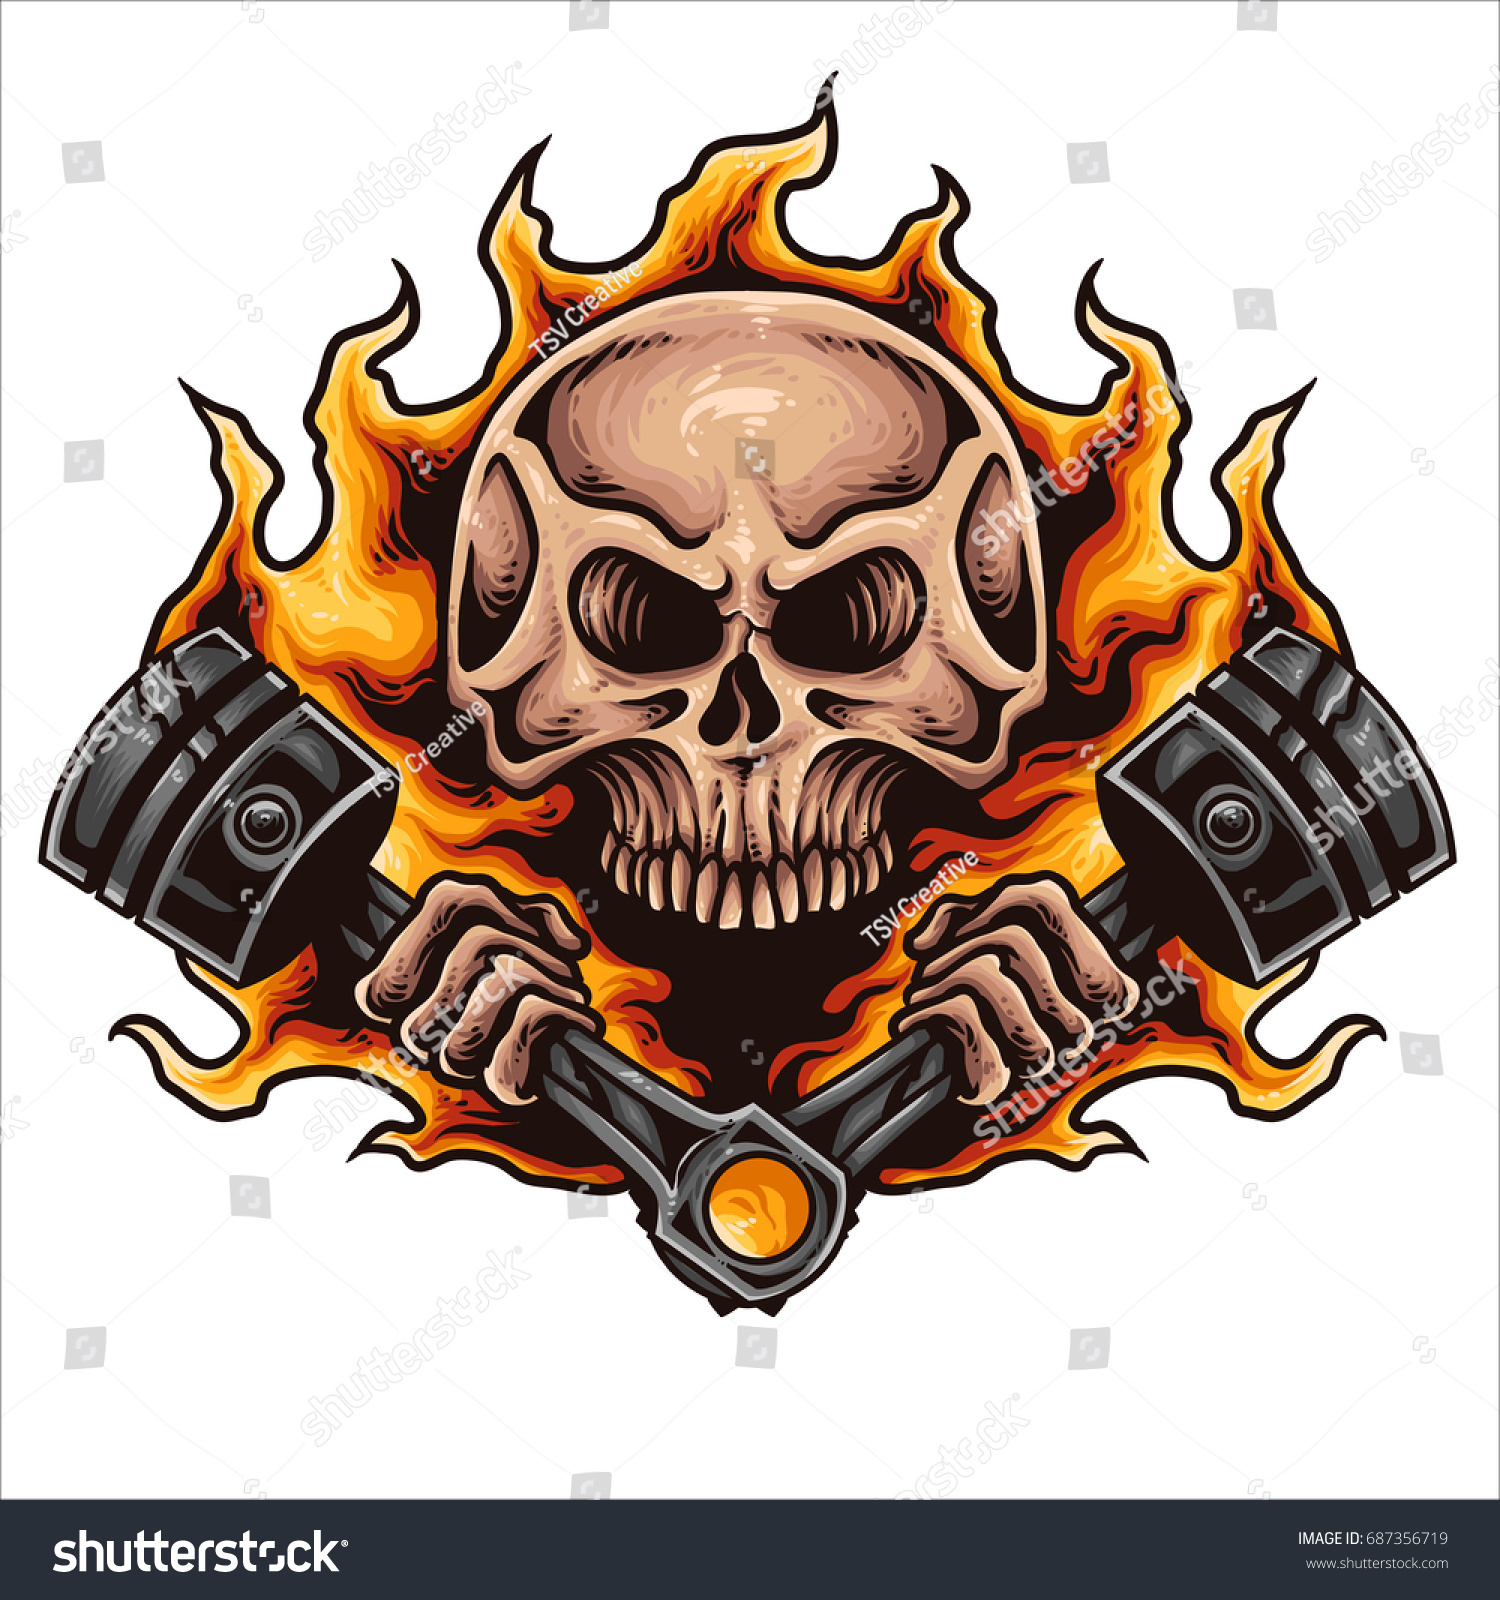 SVG of Vector illustration of skull holding two powerful hot piston with fire flame svg